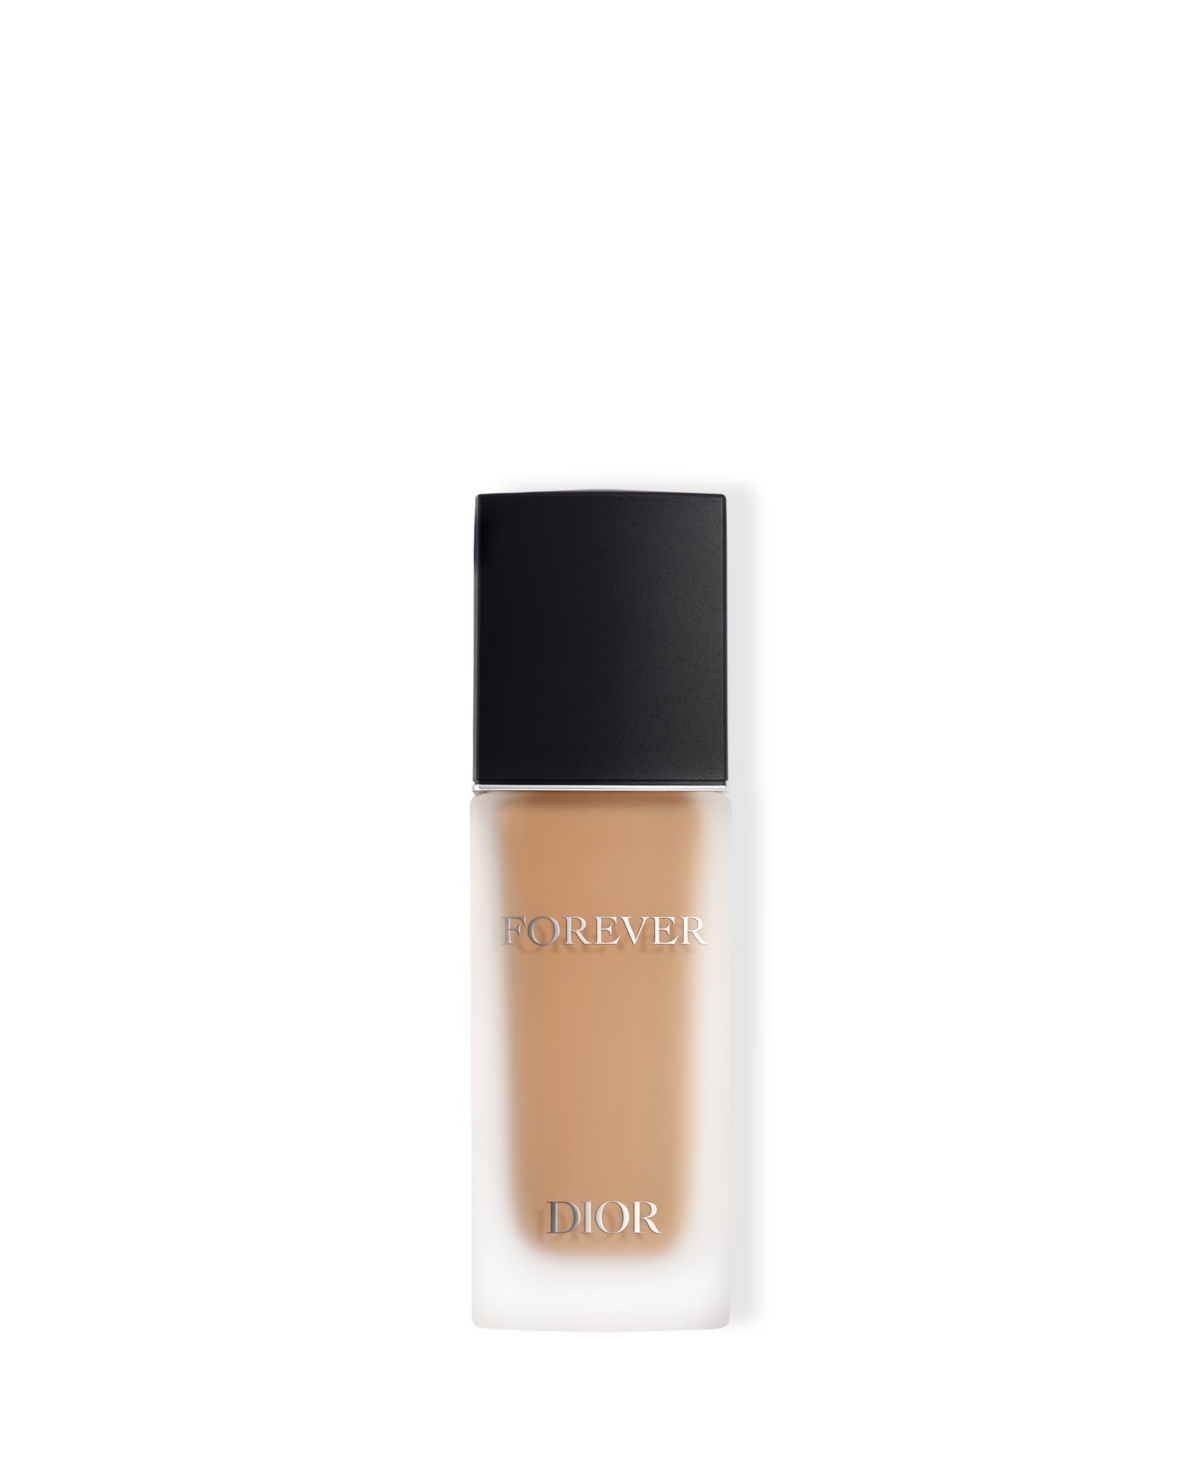 Dior Forever Matte Skincare Foundation Spf 15 In . Warm (fair Skin With Warm Tones)